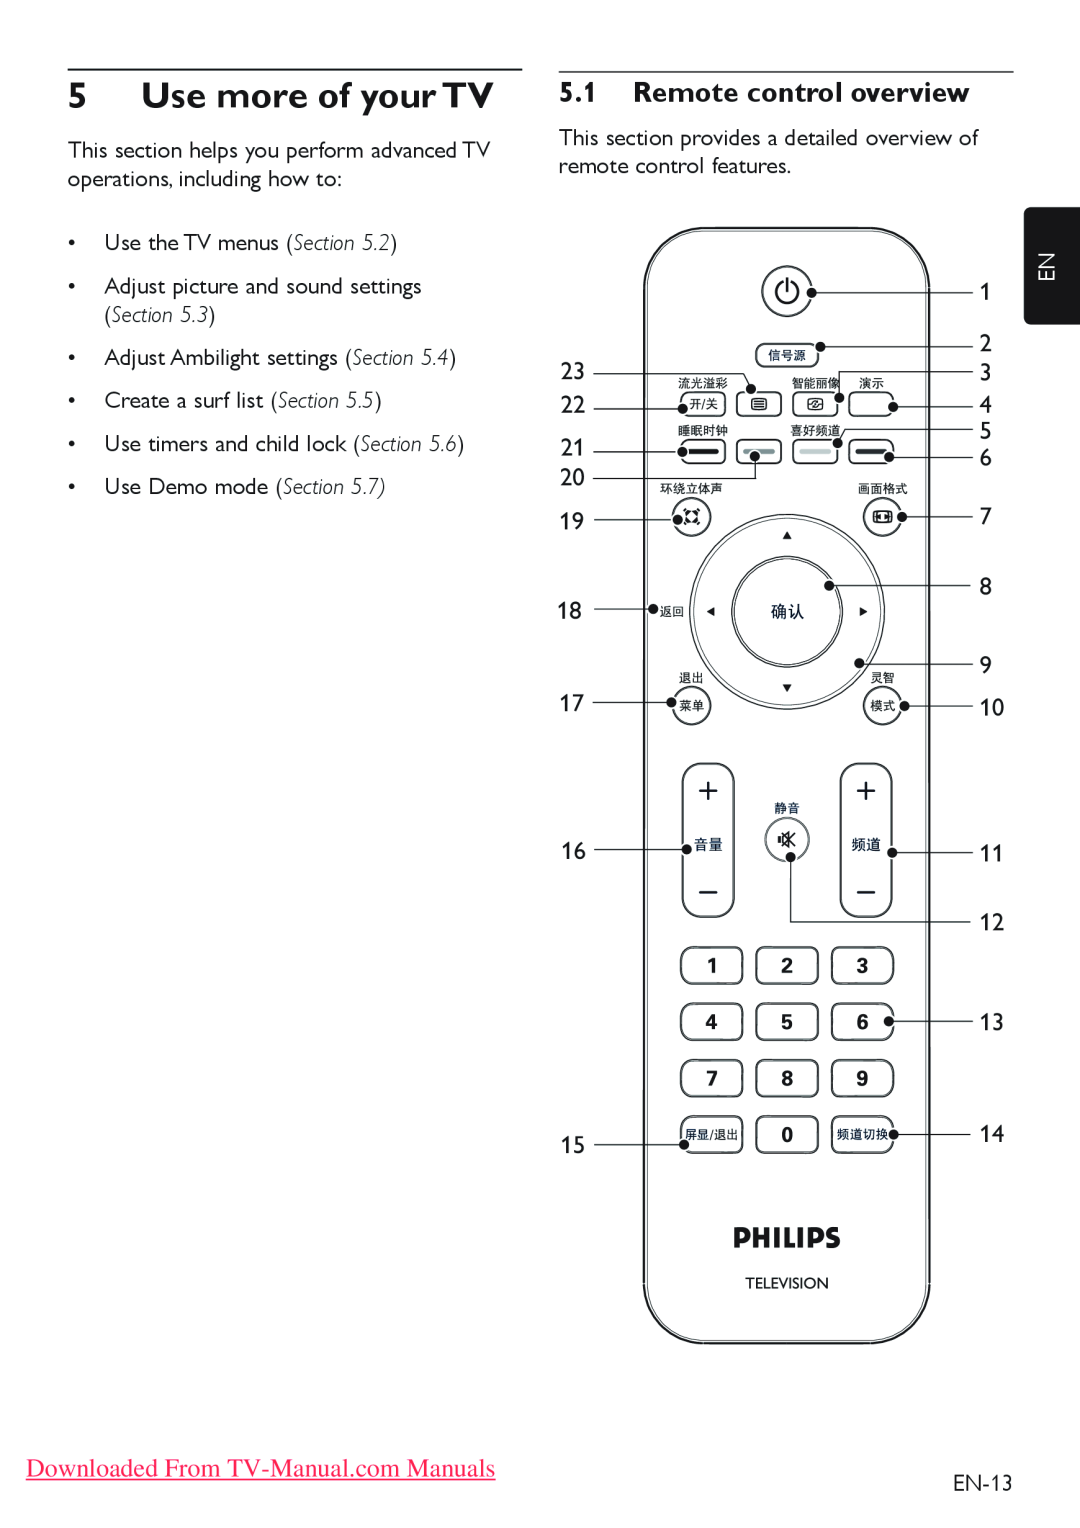 Philips 47PFL7403, 52PFL7403 Use more of your TV, 5.1Remote control overview, Downloaded From TV-Manual.comManuals 